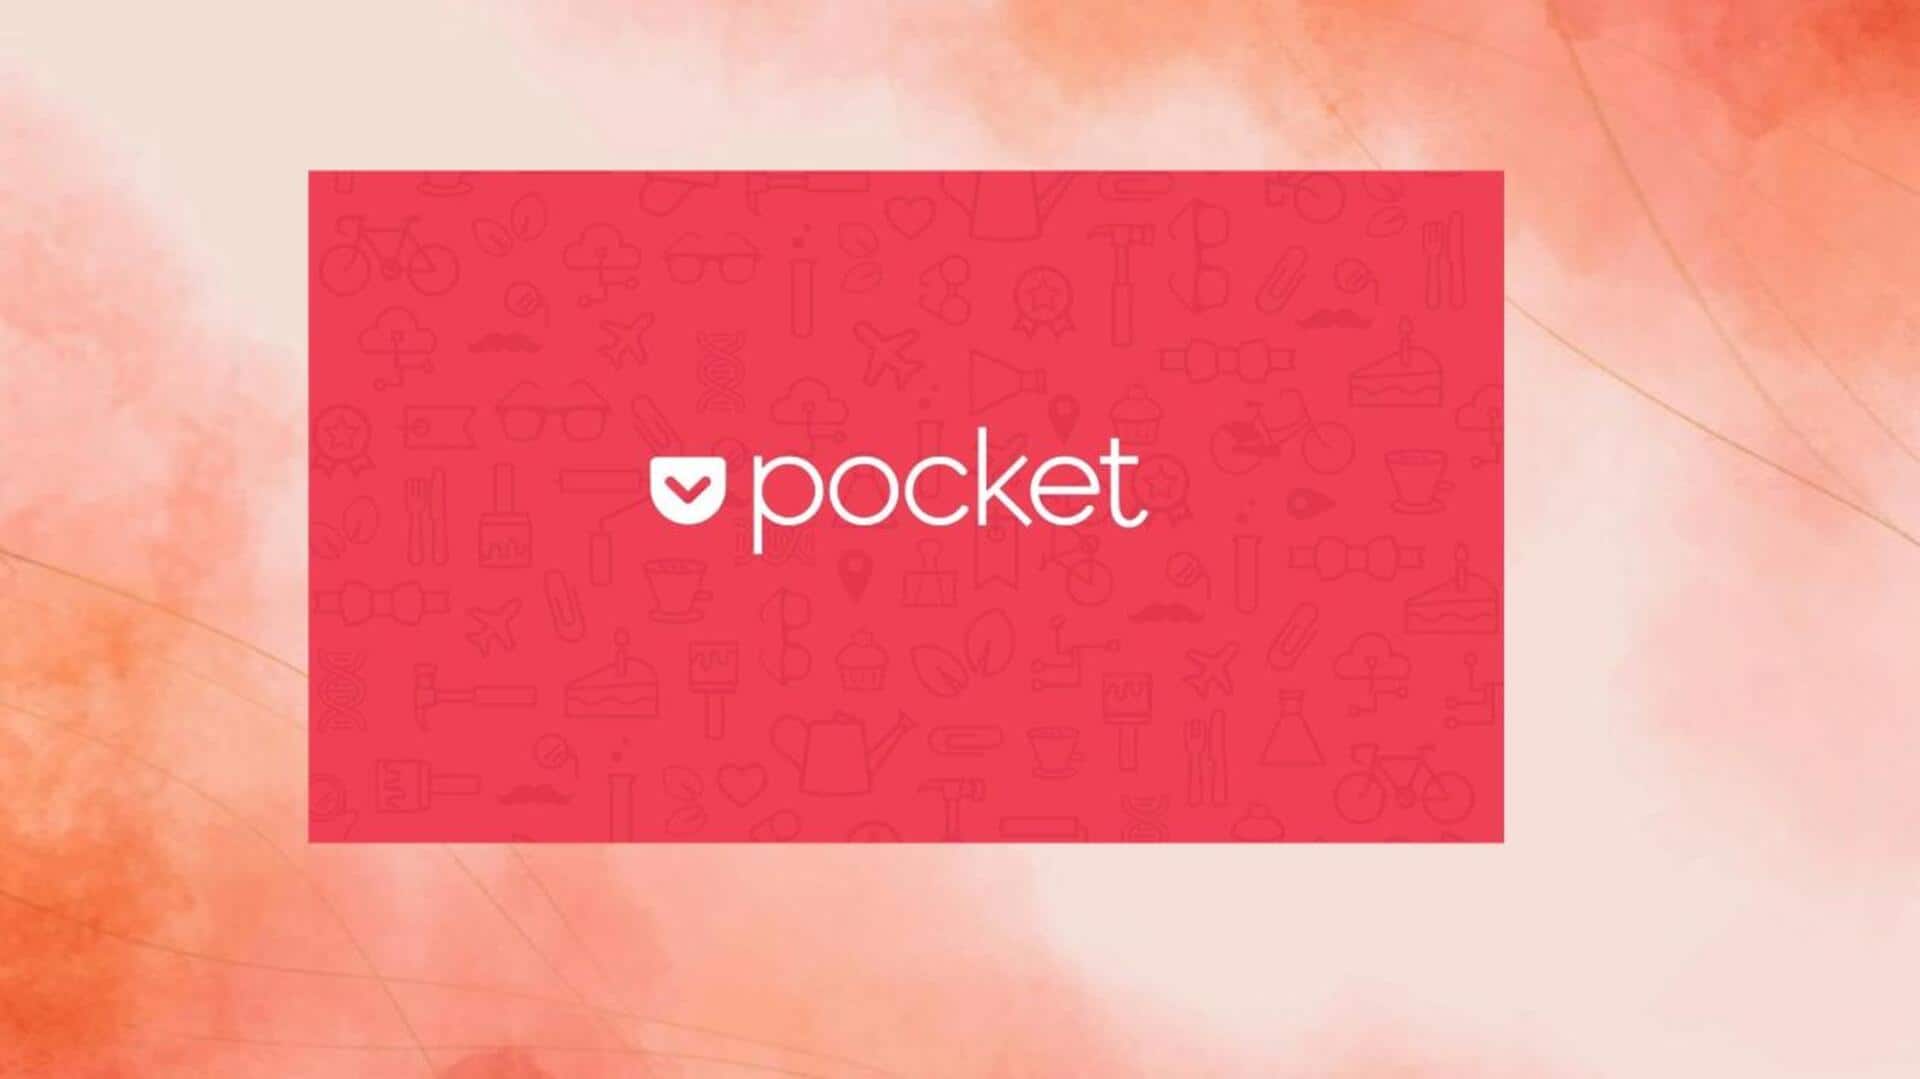 Pocket app for reading: Tips to improve your experience